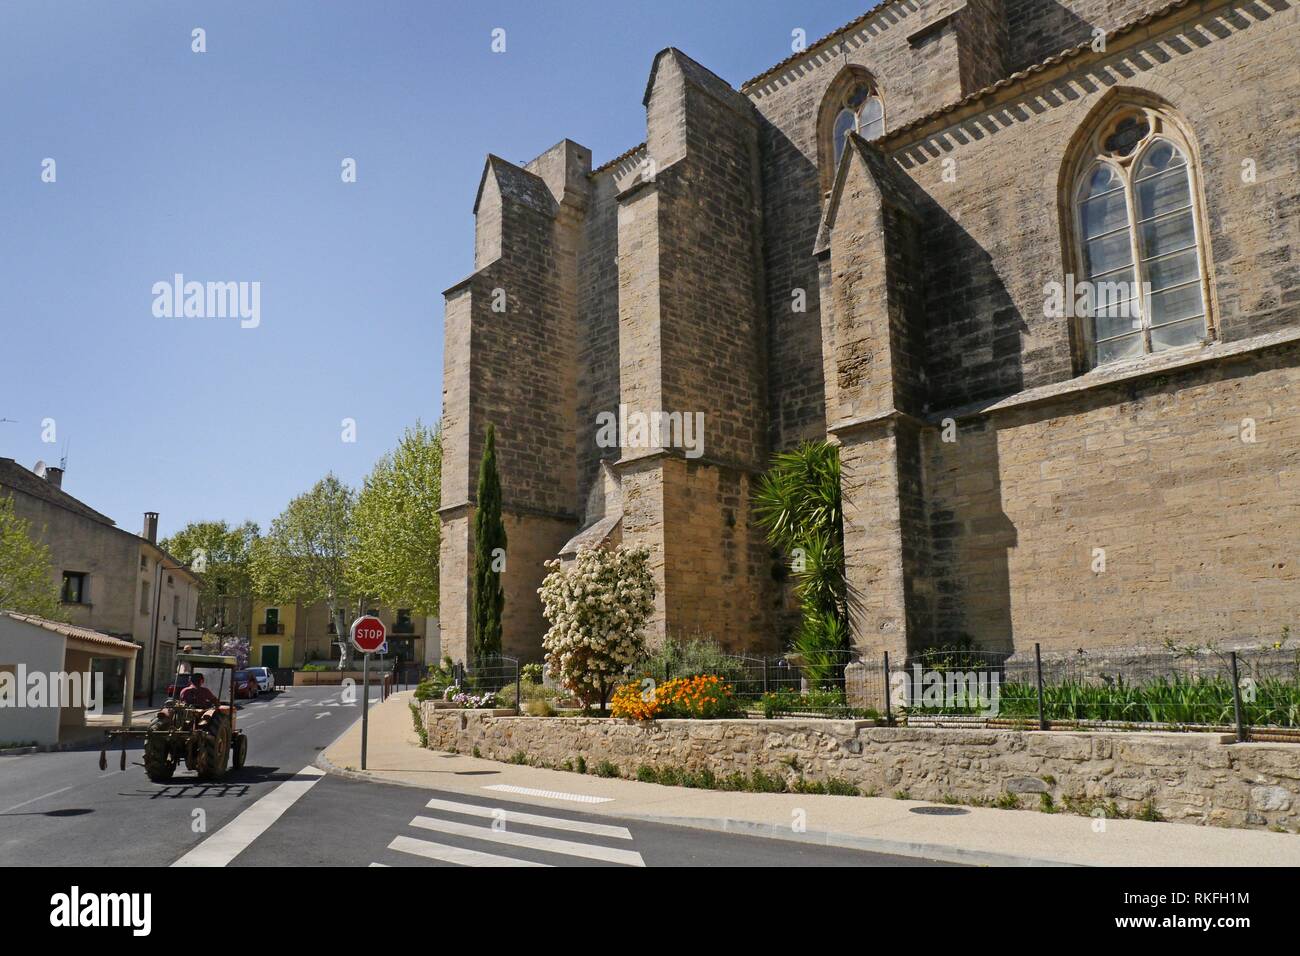 The 12th century church of Saint Saturnin in the rural French village of Tourbes. Stock Photo